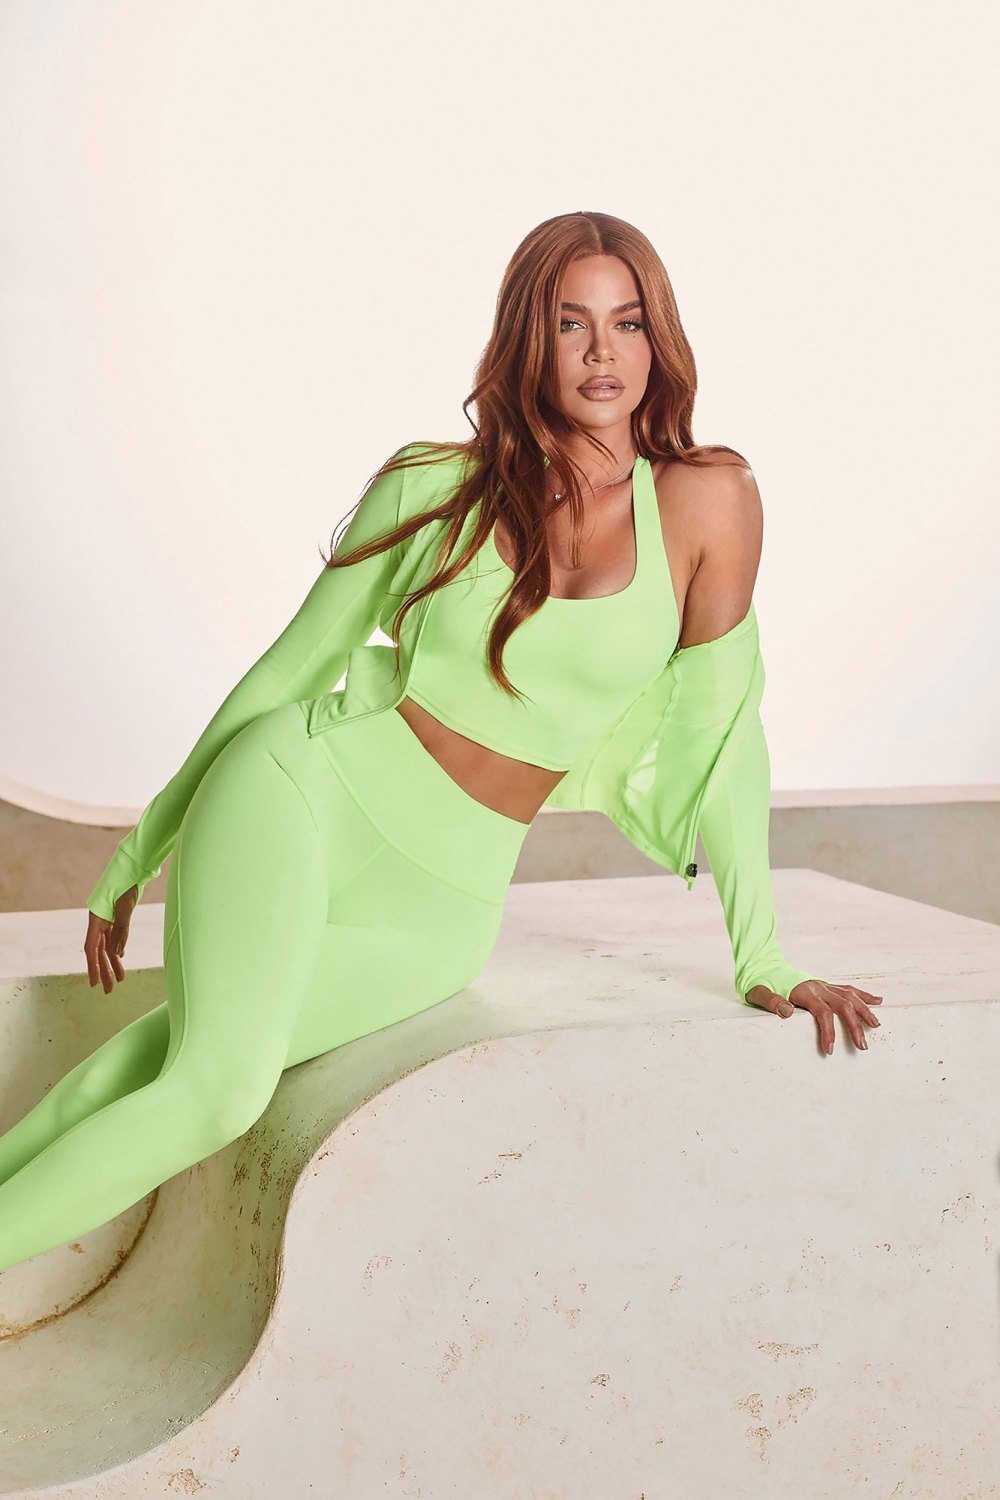 Khloe Kardashian Unveils Red Hair in Fabletics Campaign 4